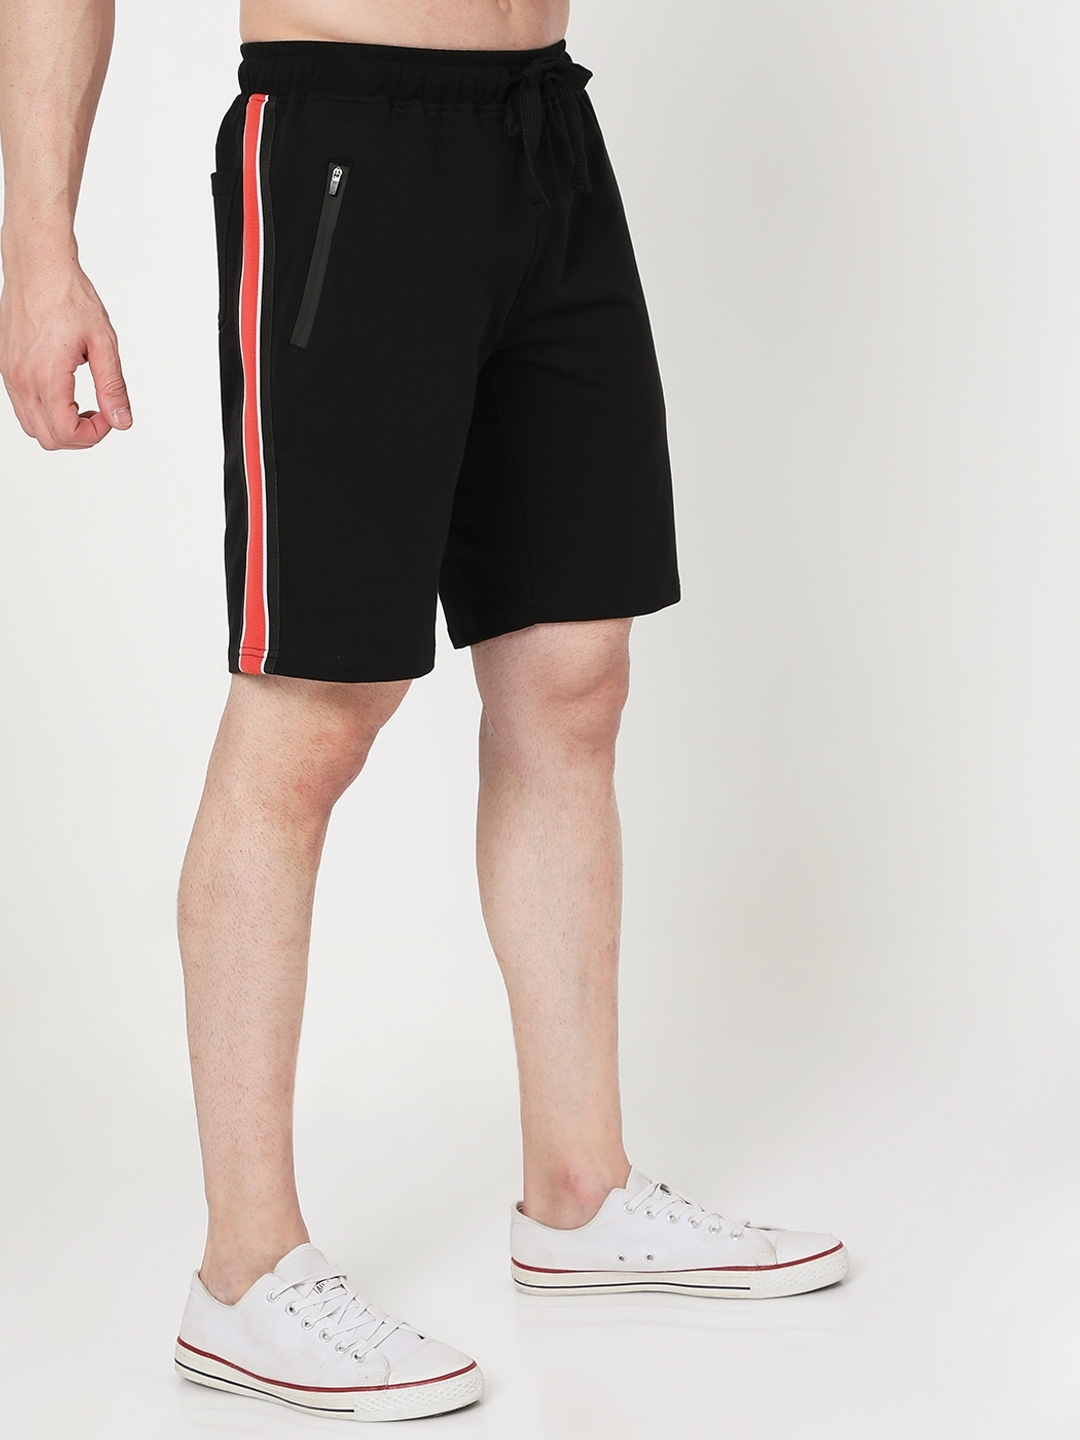 Men's Drawstring Shorts with Contrast Taping